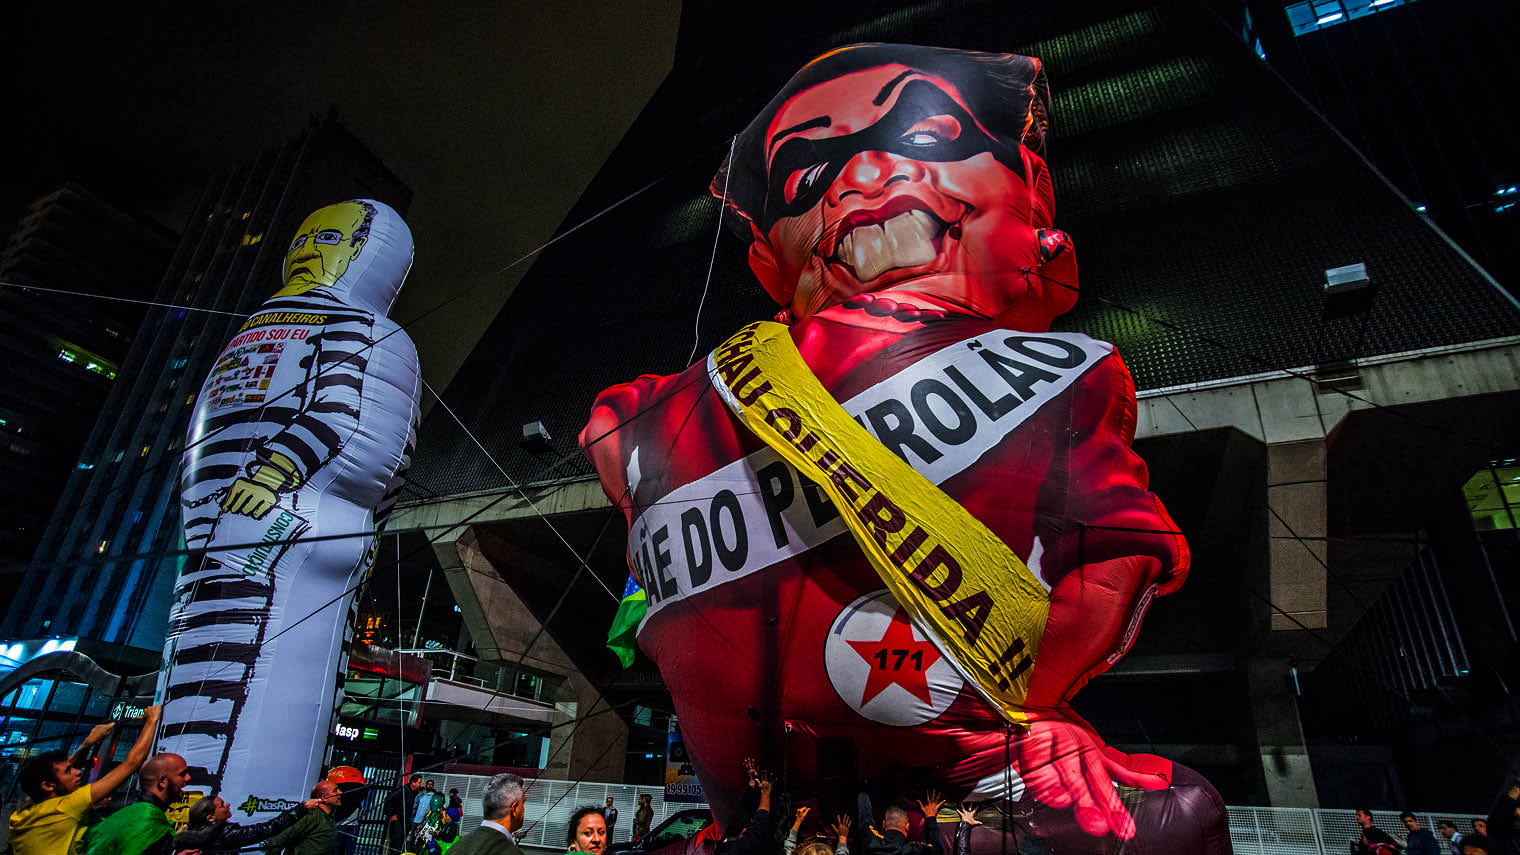 Giant balloons depicting Dilma Roussef and former president Inacio Lula Da Silva during protests in Sao Paulo in April